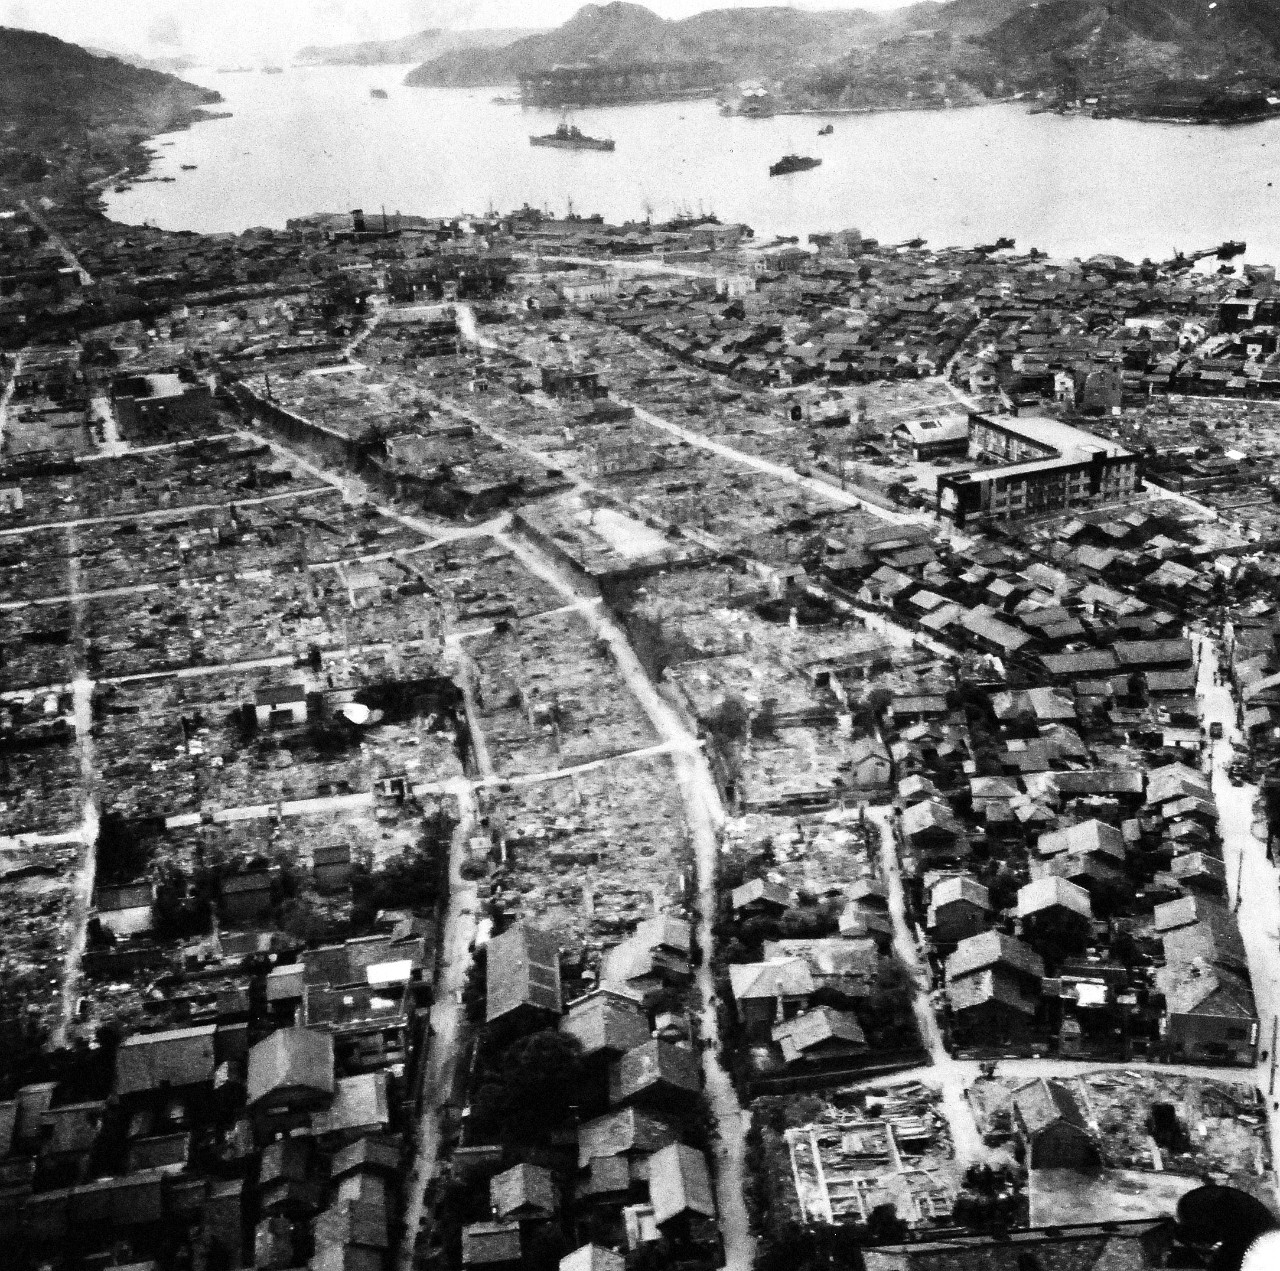 80-G-264930:   Nagasaki, Japan, 1945.    Aerial view of the bomb damage from August 9, 1945.  Altitude of 300’.  Photographed by USS Chenango (CVE-28) aircraft on October 15, 1945.   Official U.S. Navy photograph, now in the collections of the National Archives.   (2015/12/01).